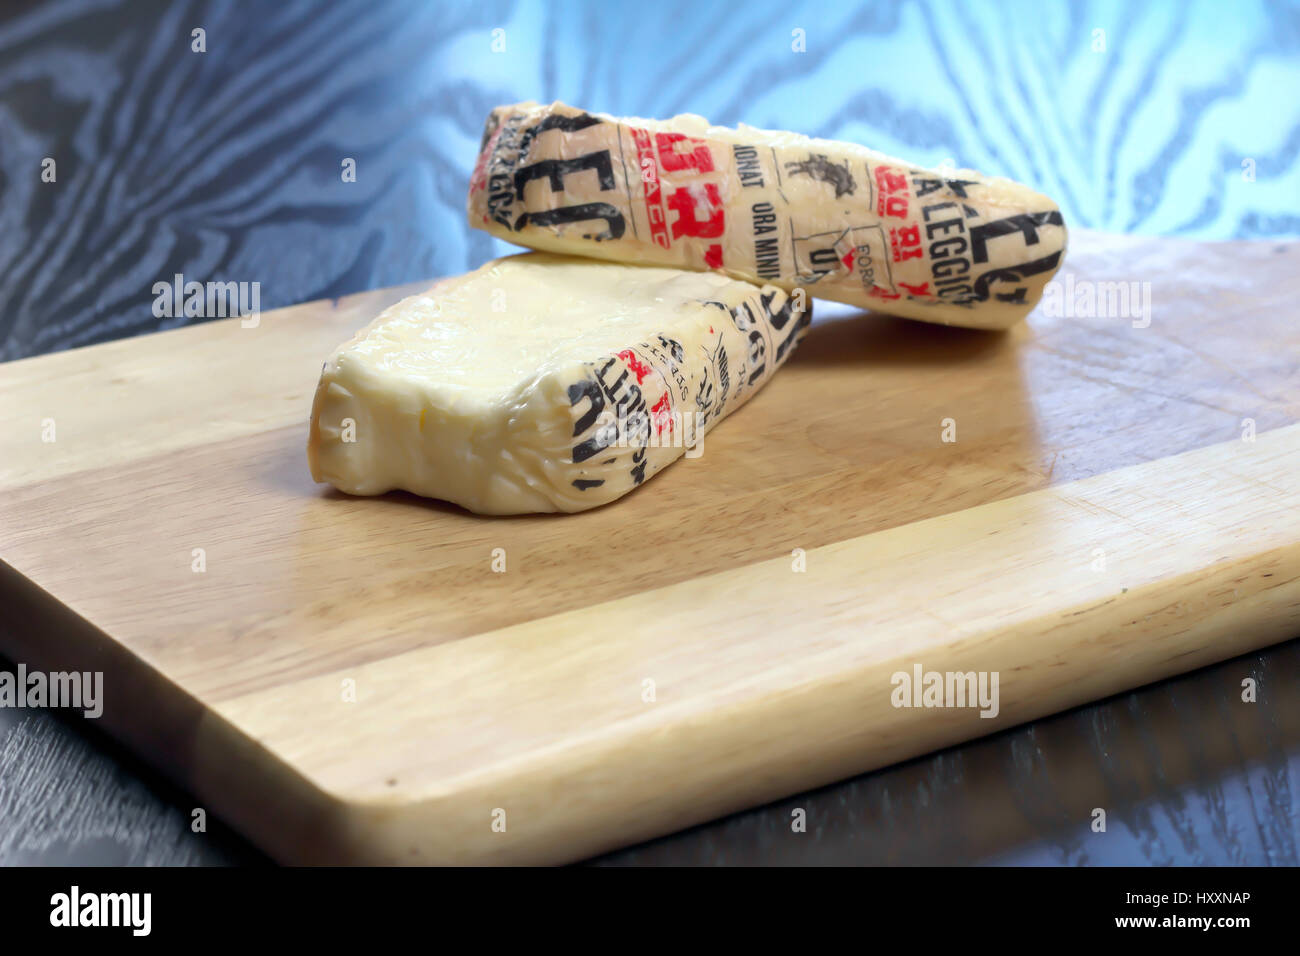 Cut Italian Taleggio Cheese on wooden cutting board - Lombardy typical cheese with strong aroma, but its flavor is mild with an unusual fruity tang Stock Photo